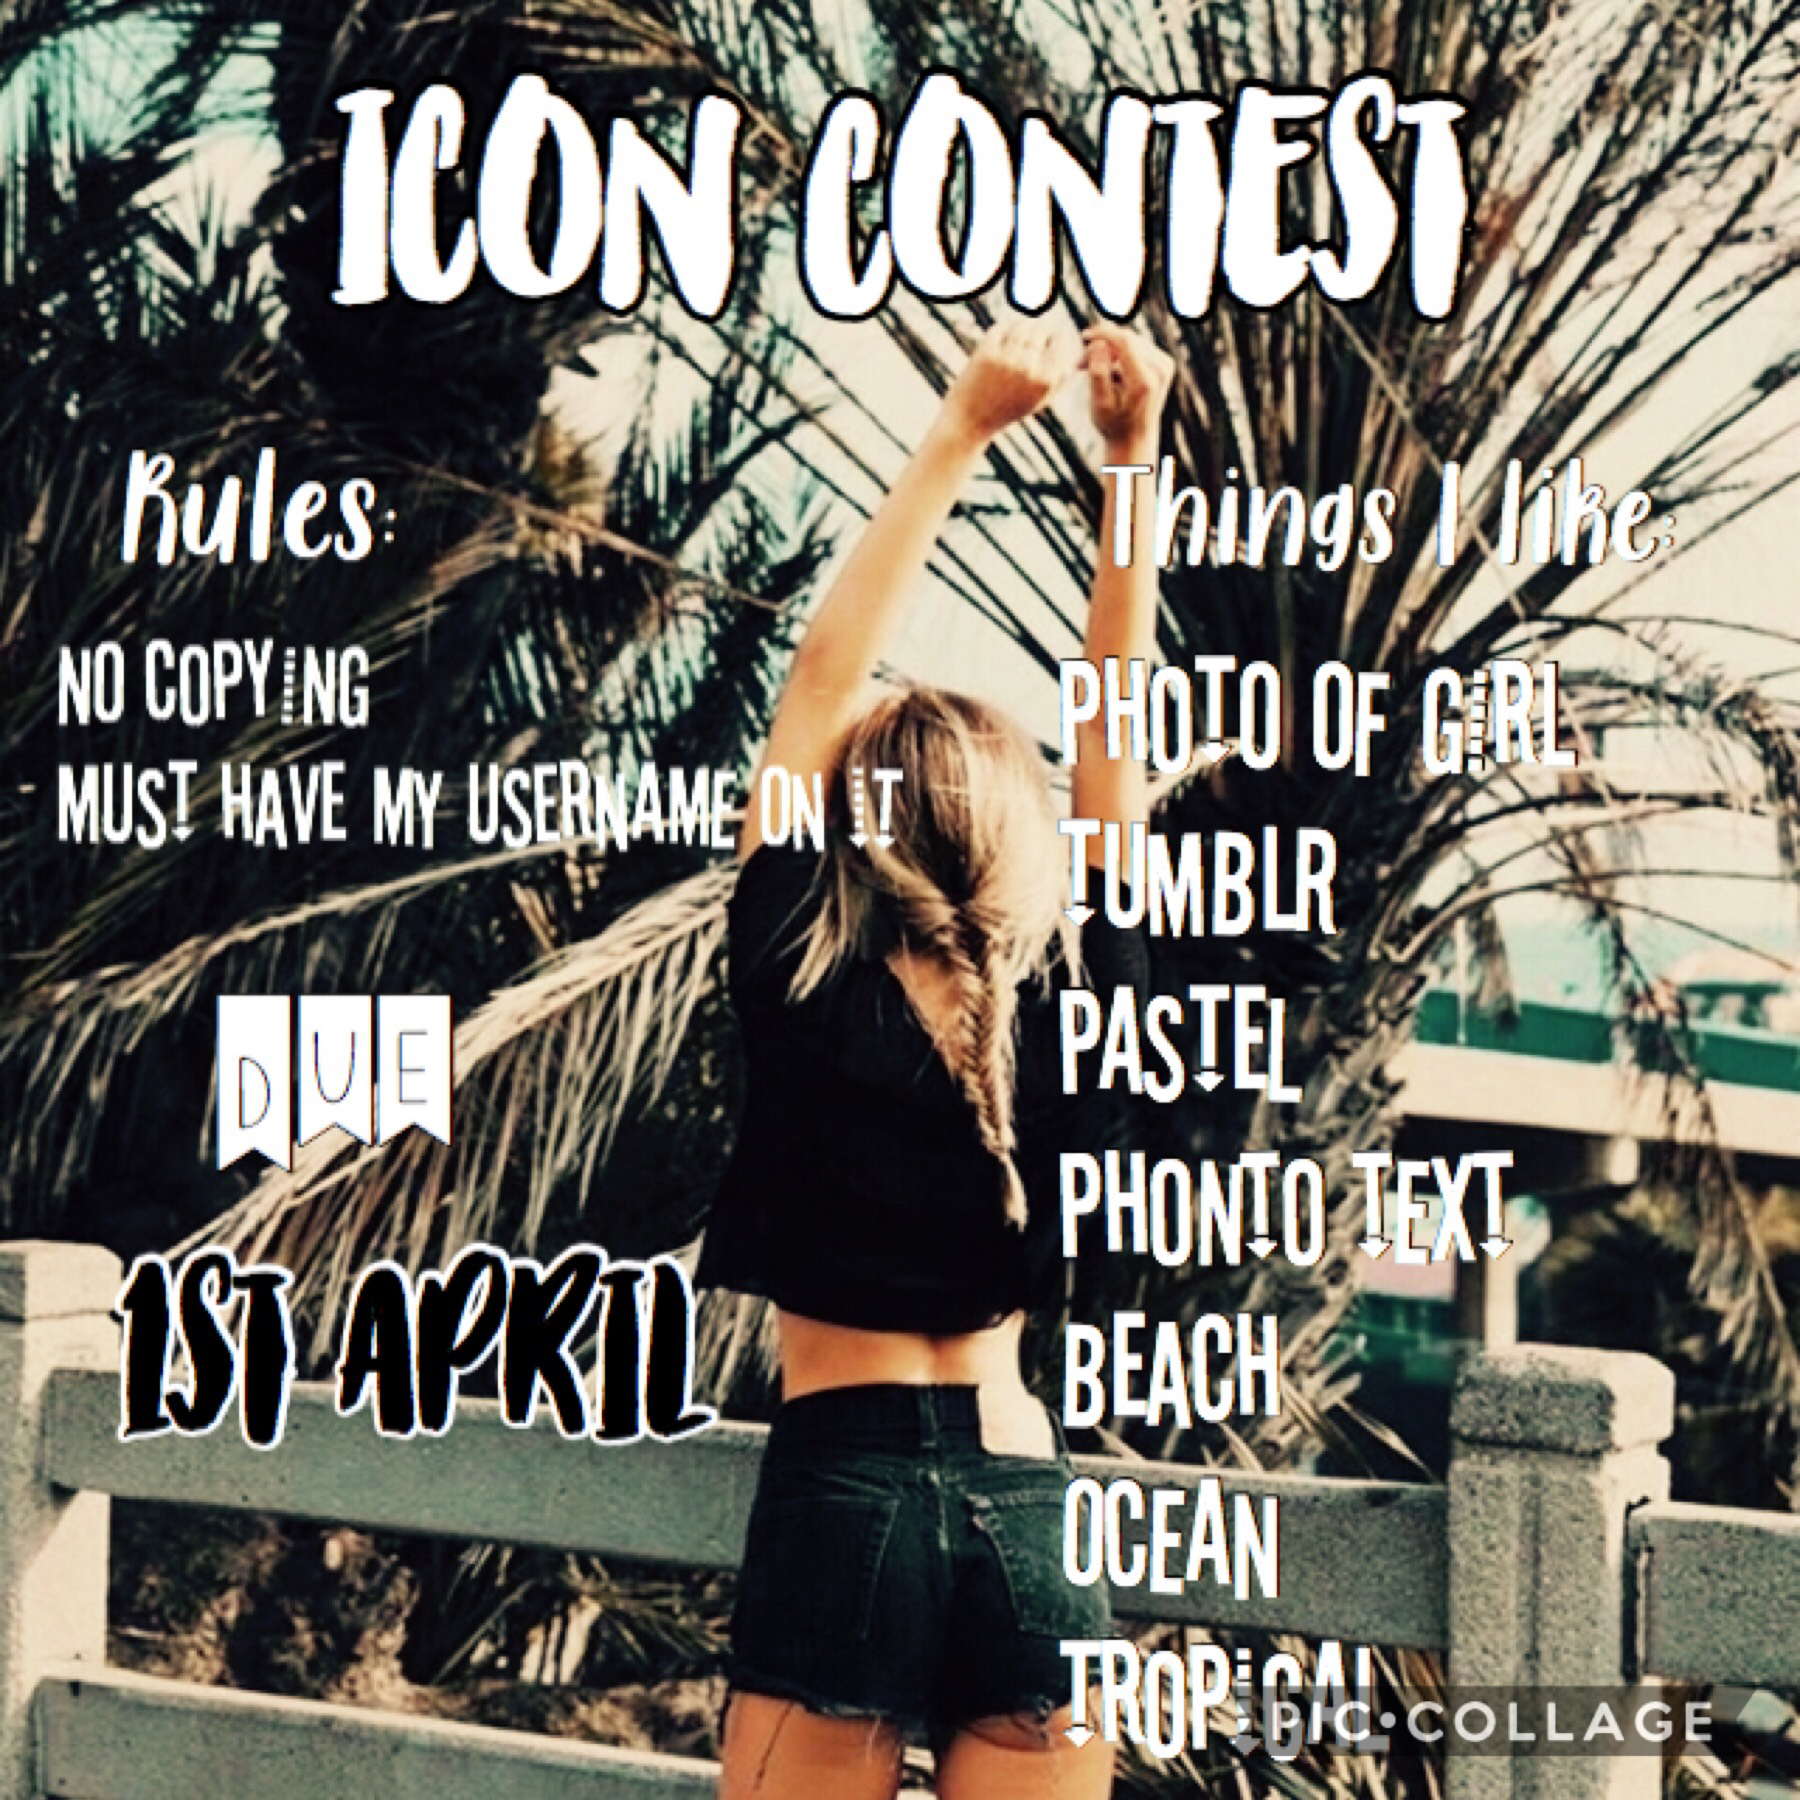 ❤️TAP❤️

Please enter! Prizes will be posted soon! 💖